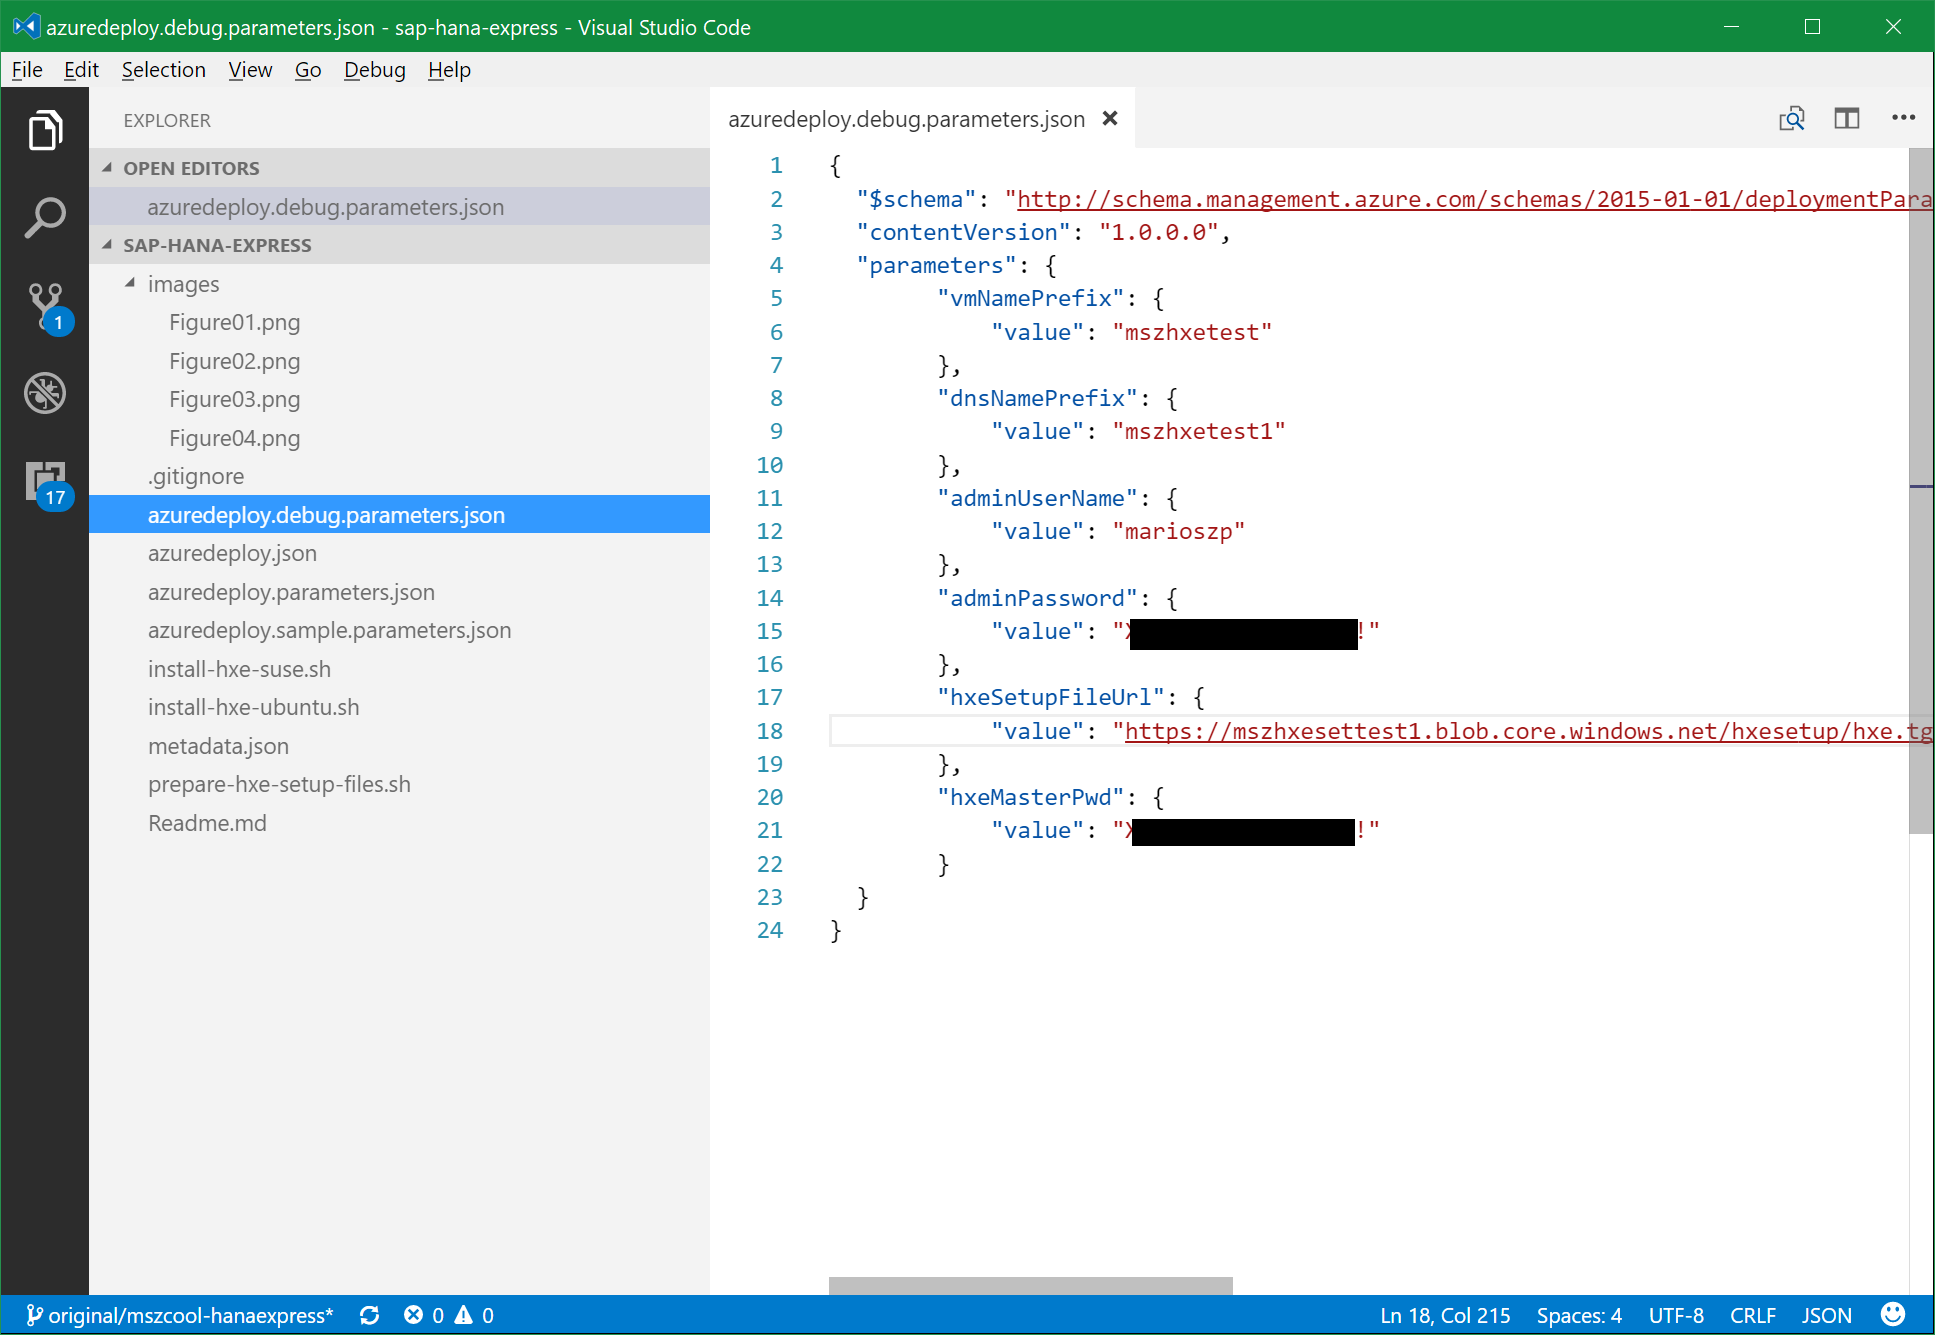 Parameters filled in the azuredeploy.parameters.json